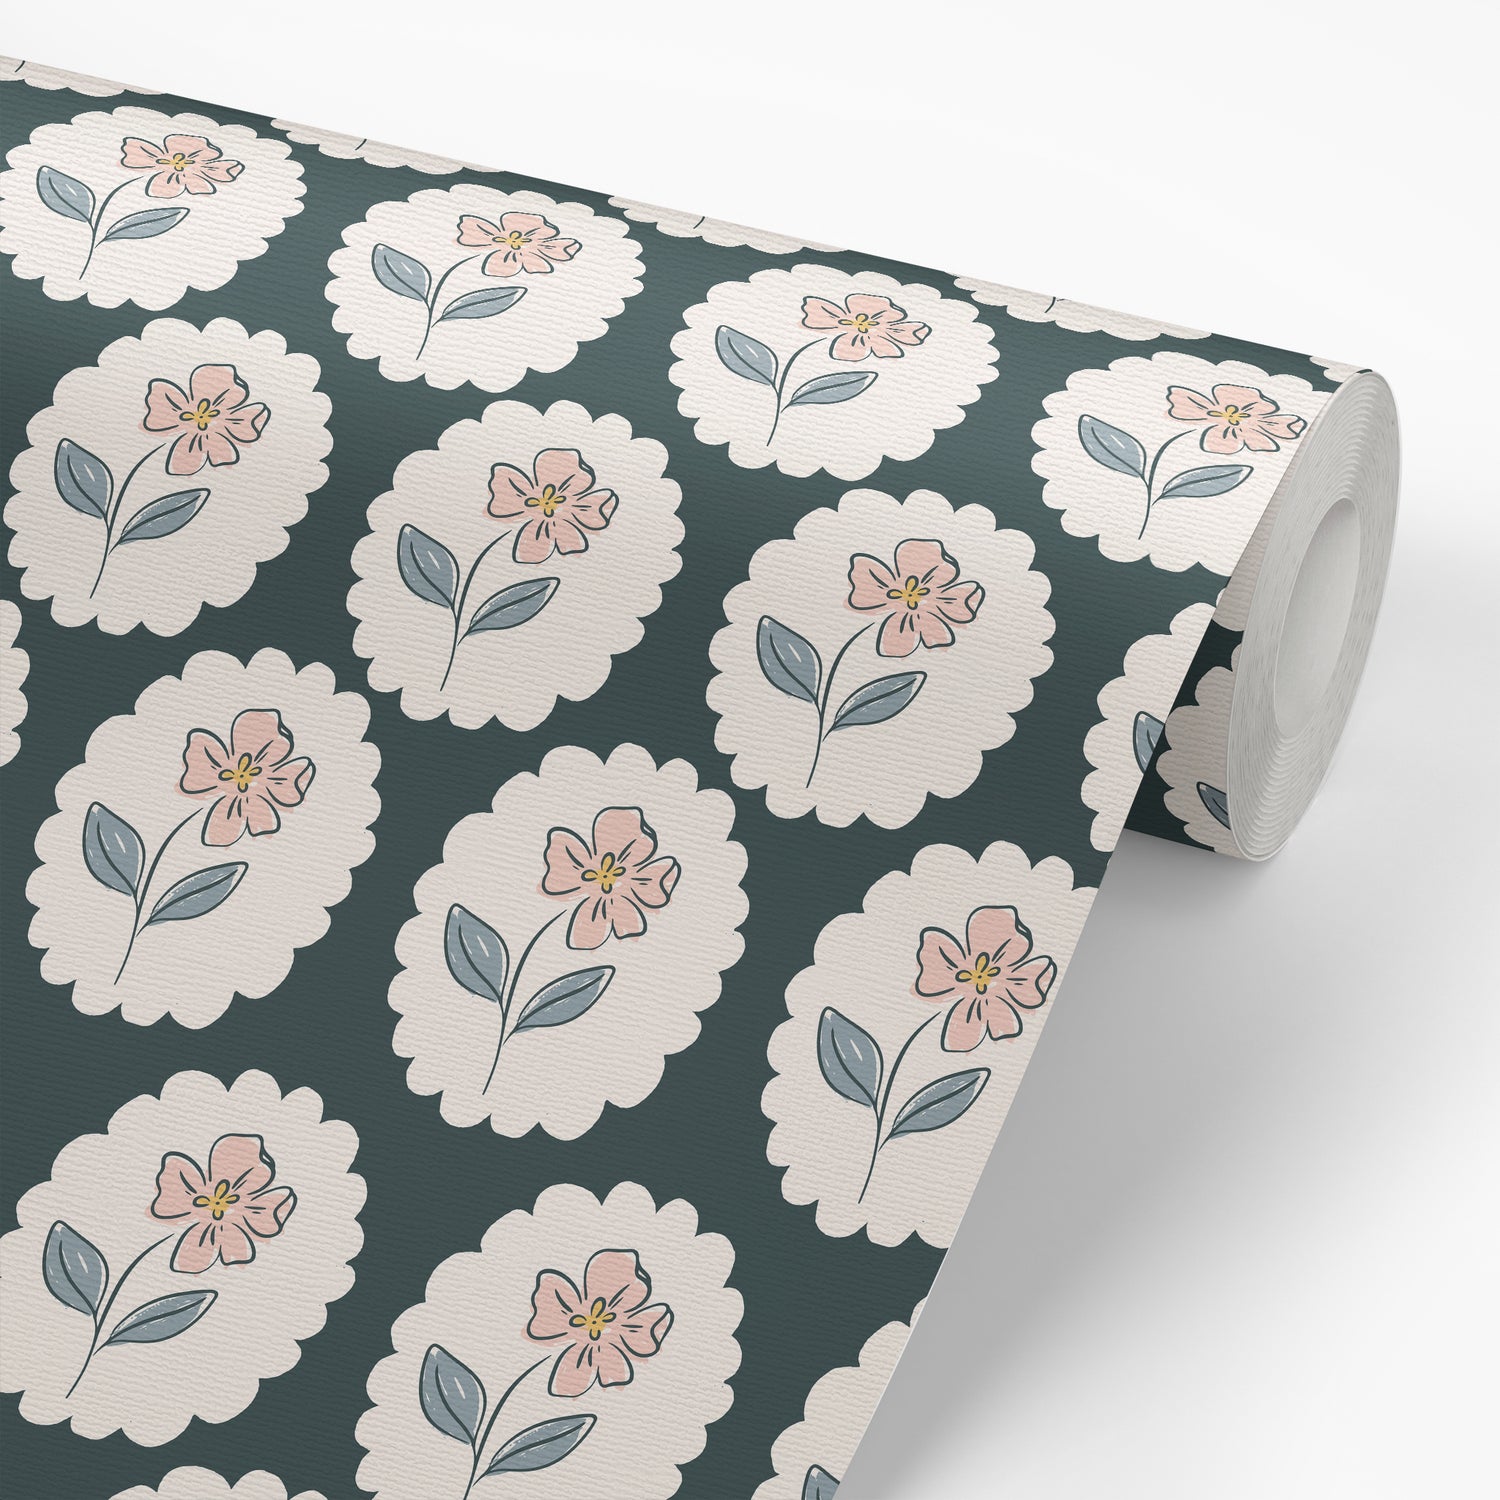 Wallpaper Roll featuring Dancing Petals Peel and Stick, Removable Wallpaper in Dark Green